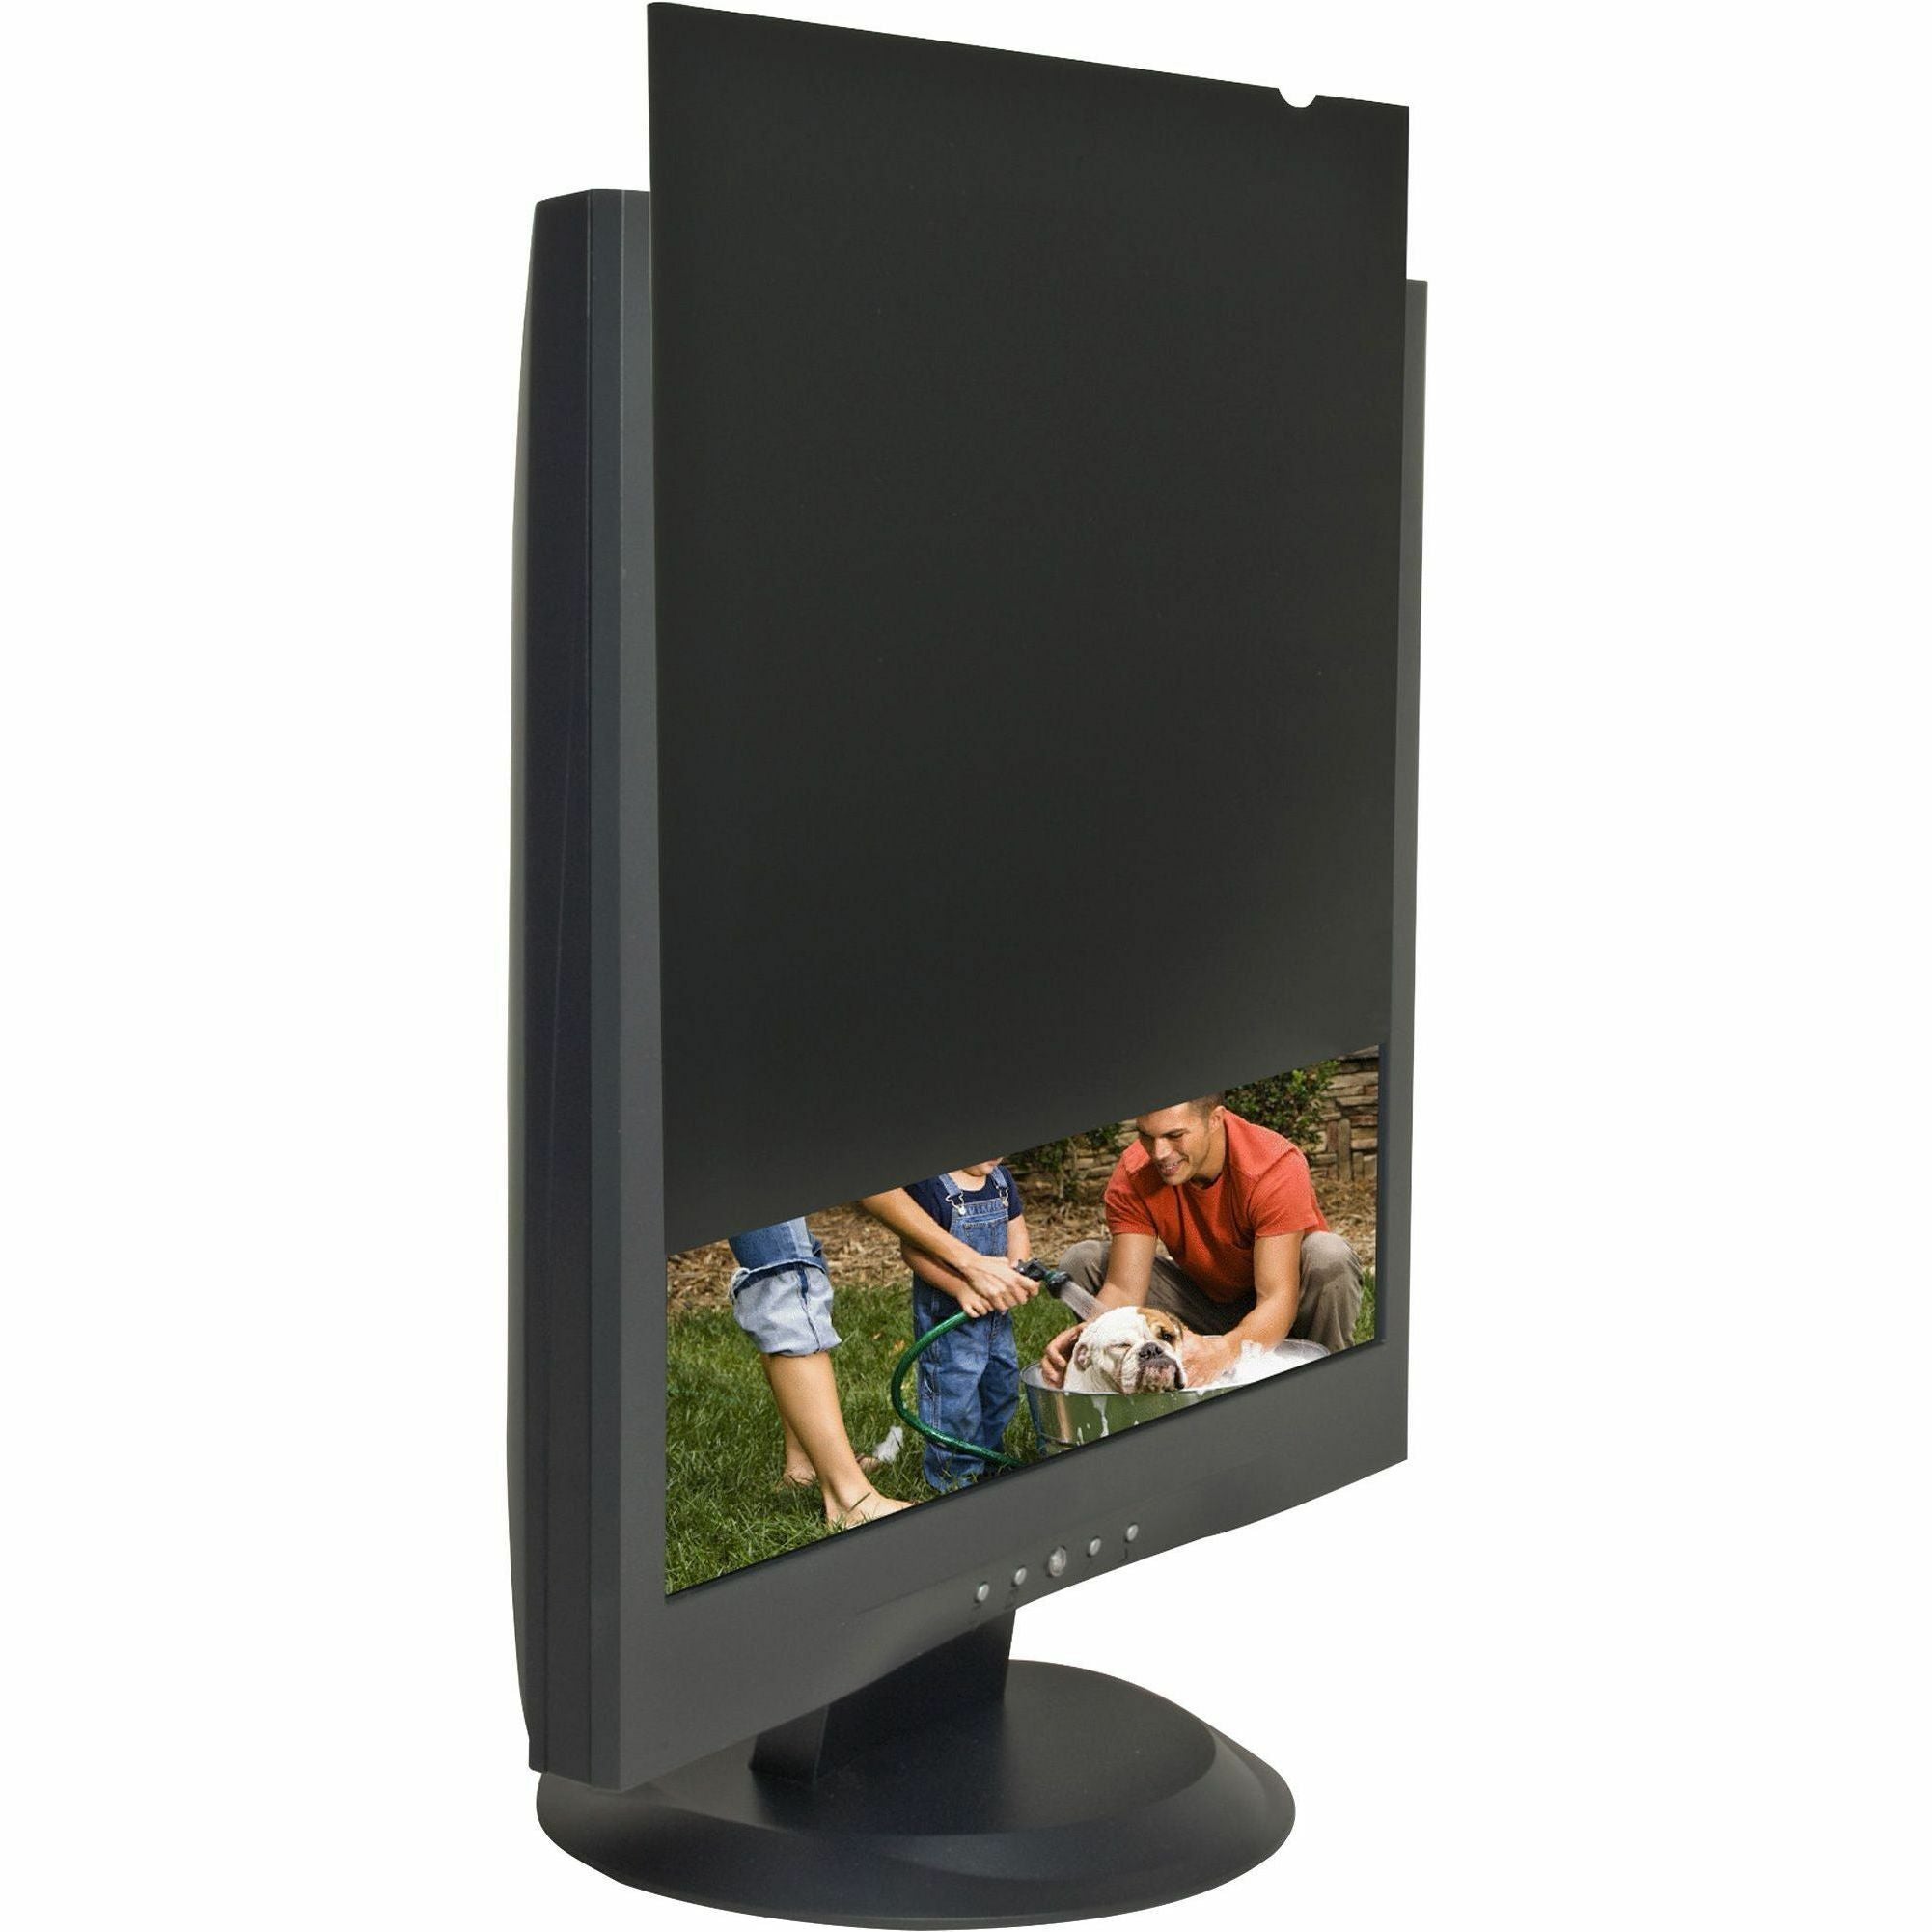 business-source-17-monitor-blackout-privacy-filter-black-for-17lcd-monitor-54-anti-glare-1-pack_bsn20665 - 2